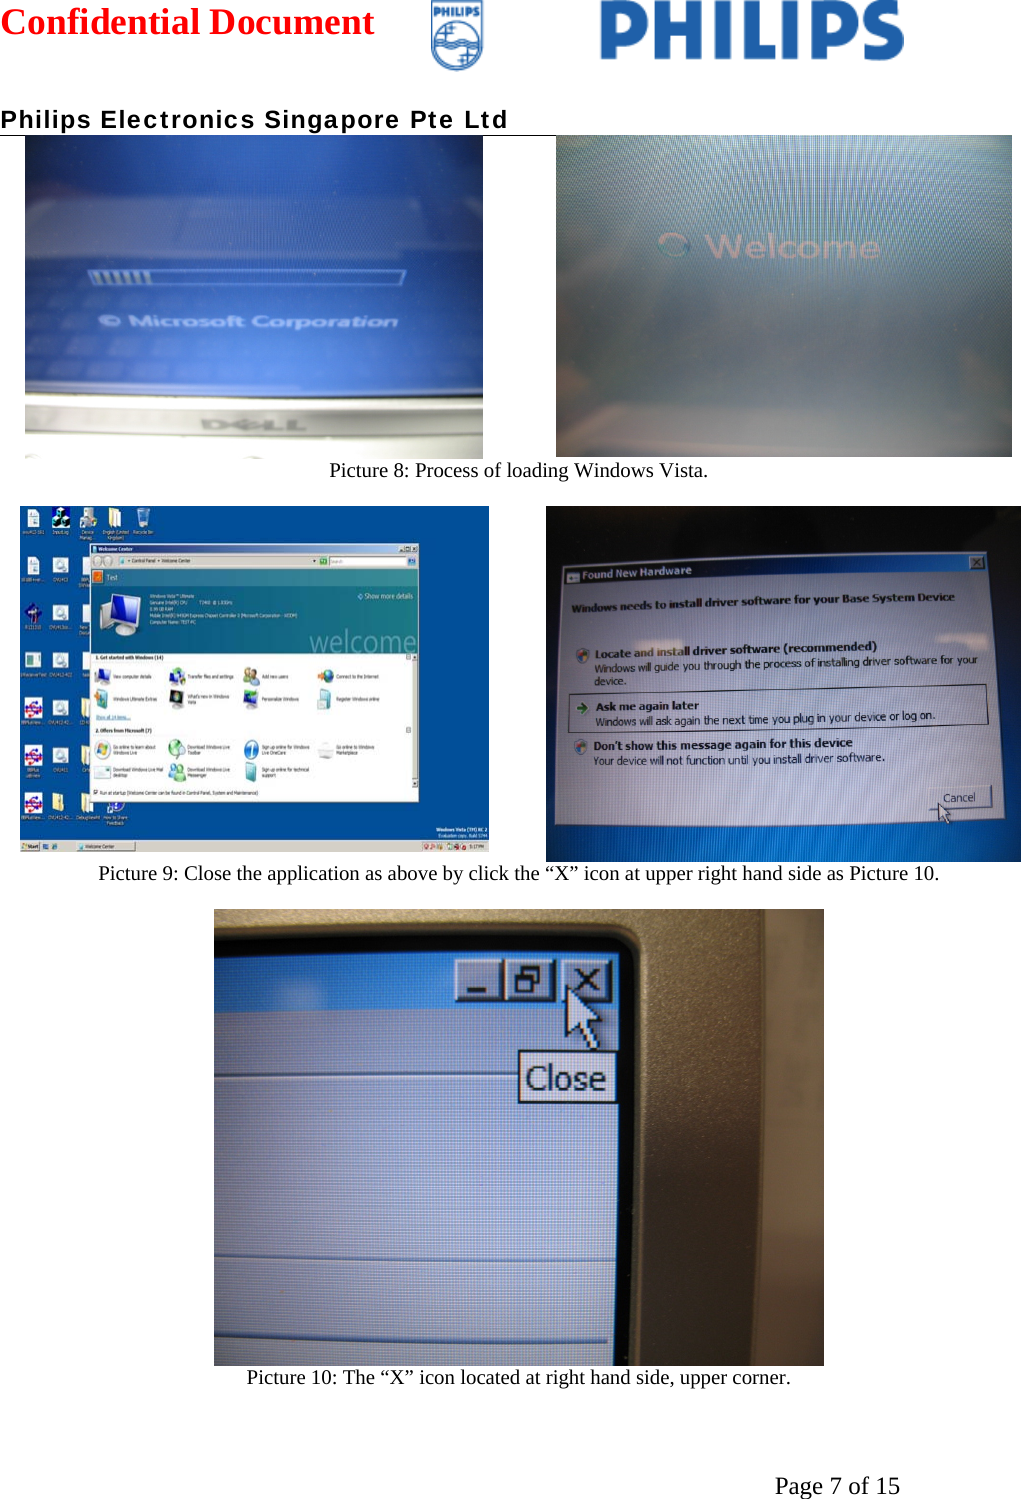 Confidential Document   Philips Electronics Singapore Pte Ltd  Page 7 of 15Picture 8: Process of loading Windows Vista.   Picture 9: Close the application as above by click the “X” icon at upper right hand side as Picture 10.   Picture 10: The “X” icon located at right hand side, upper corner. 